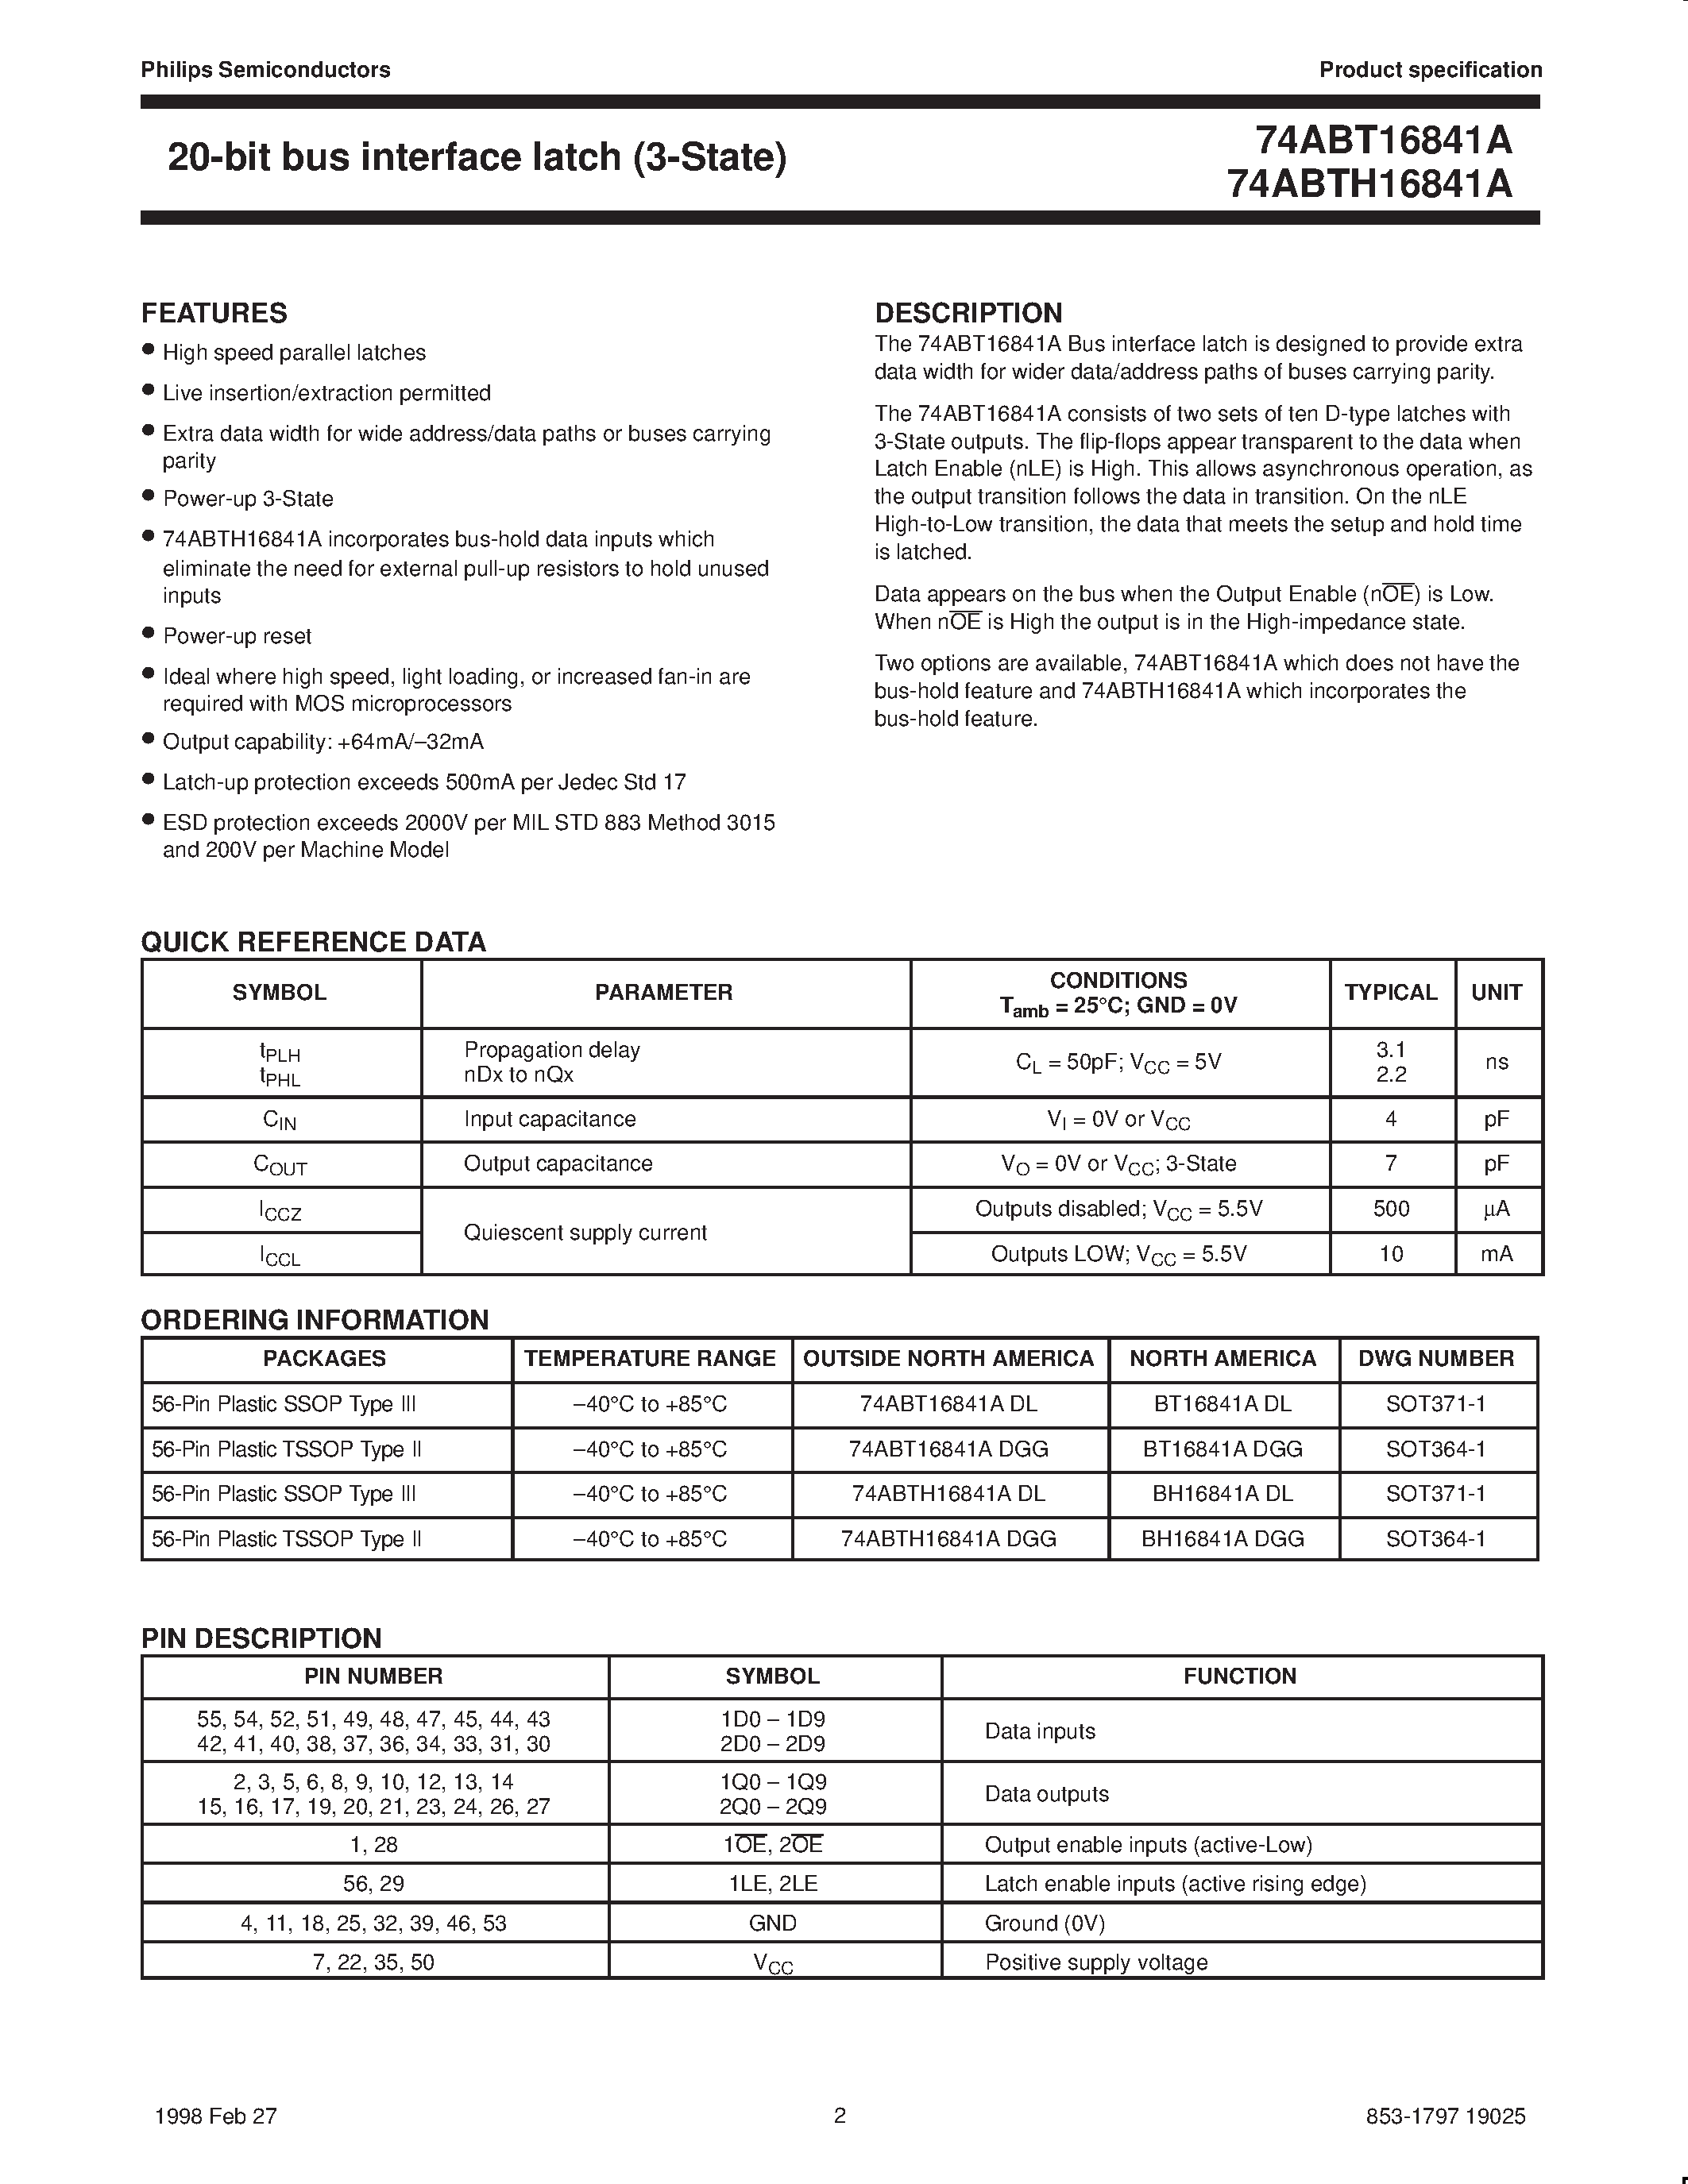 Datasheet 74ABTH16841A - 20-bit bus interface latch 3-State page 2